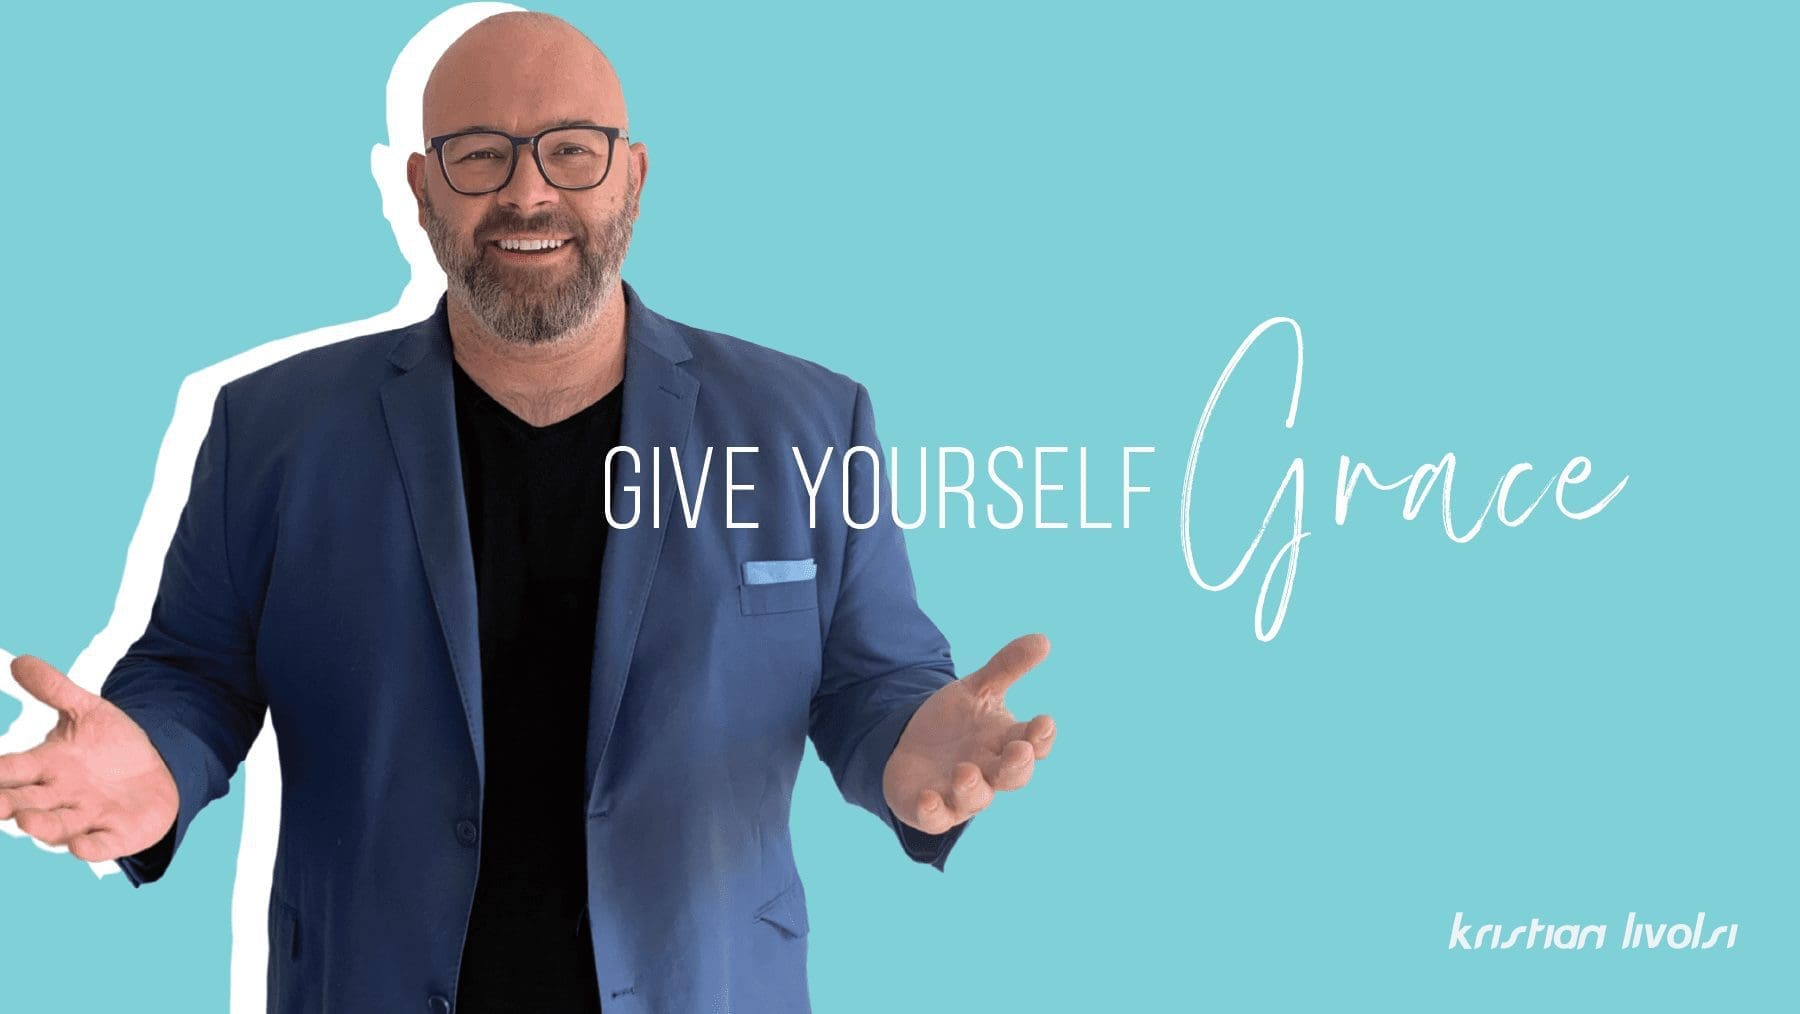 Give yourself grace by kristian livolsi in light blue background